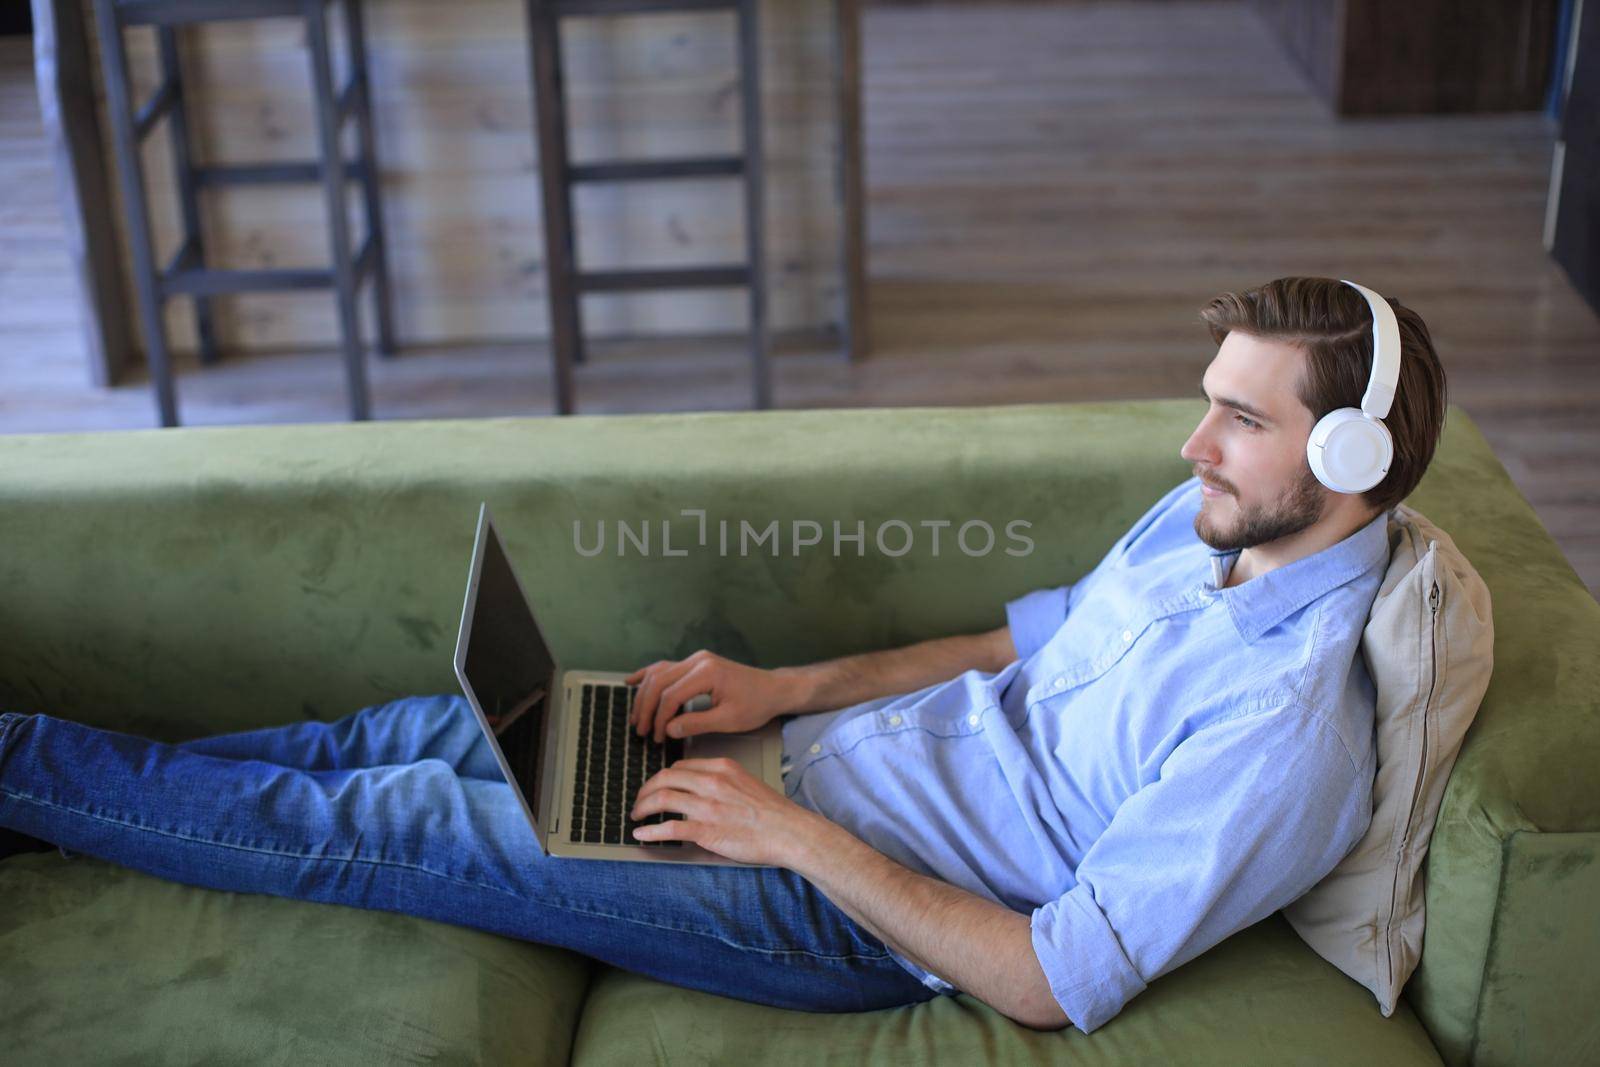 Concentrated young freelancer businessman sitting on sofa with laptop, working remotely online at home